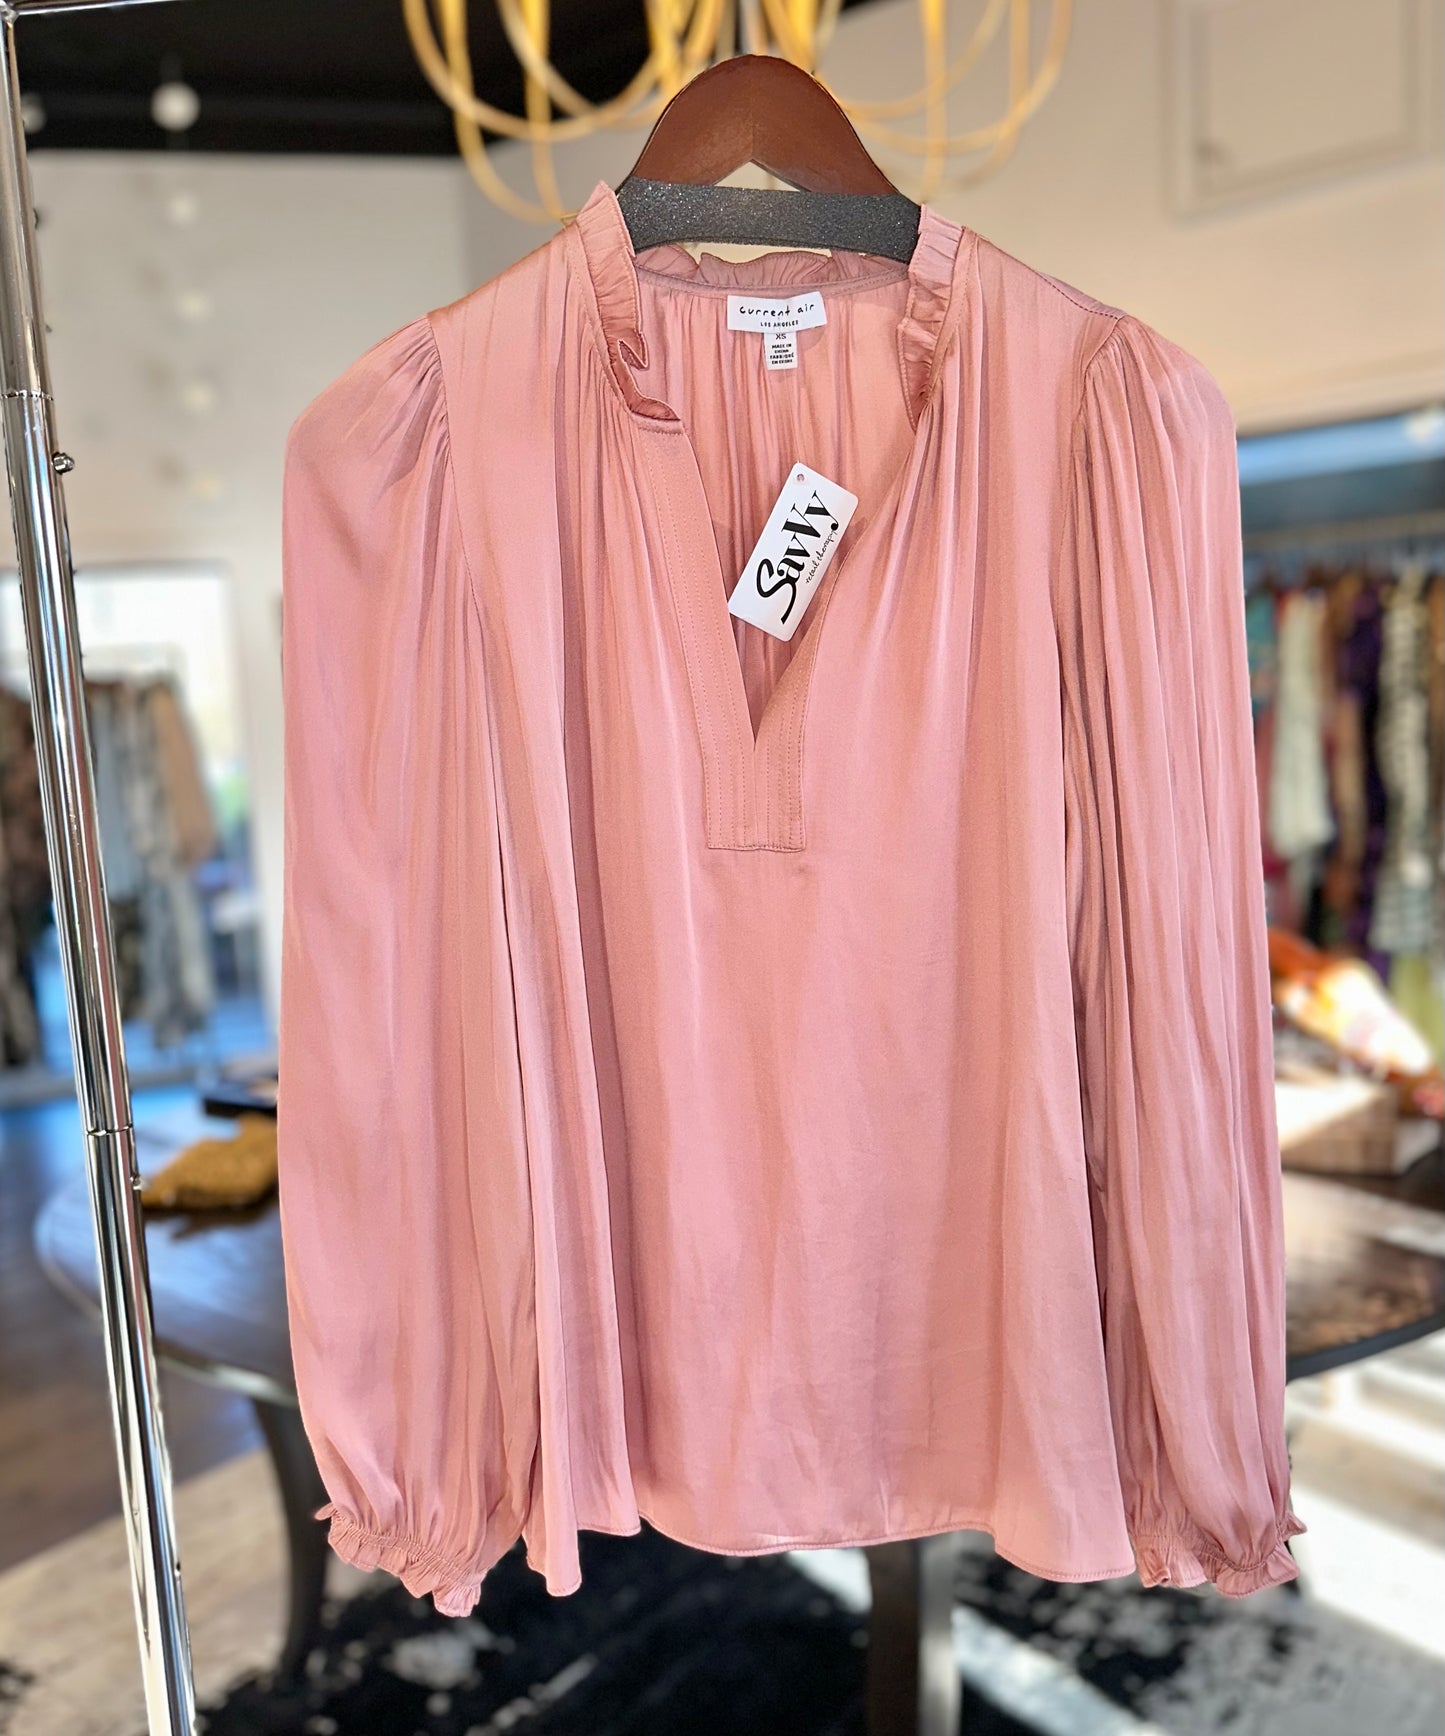 Long Sleeve Ruffled Split Neck Blouse in dusty blush by Current Air